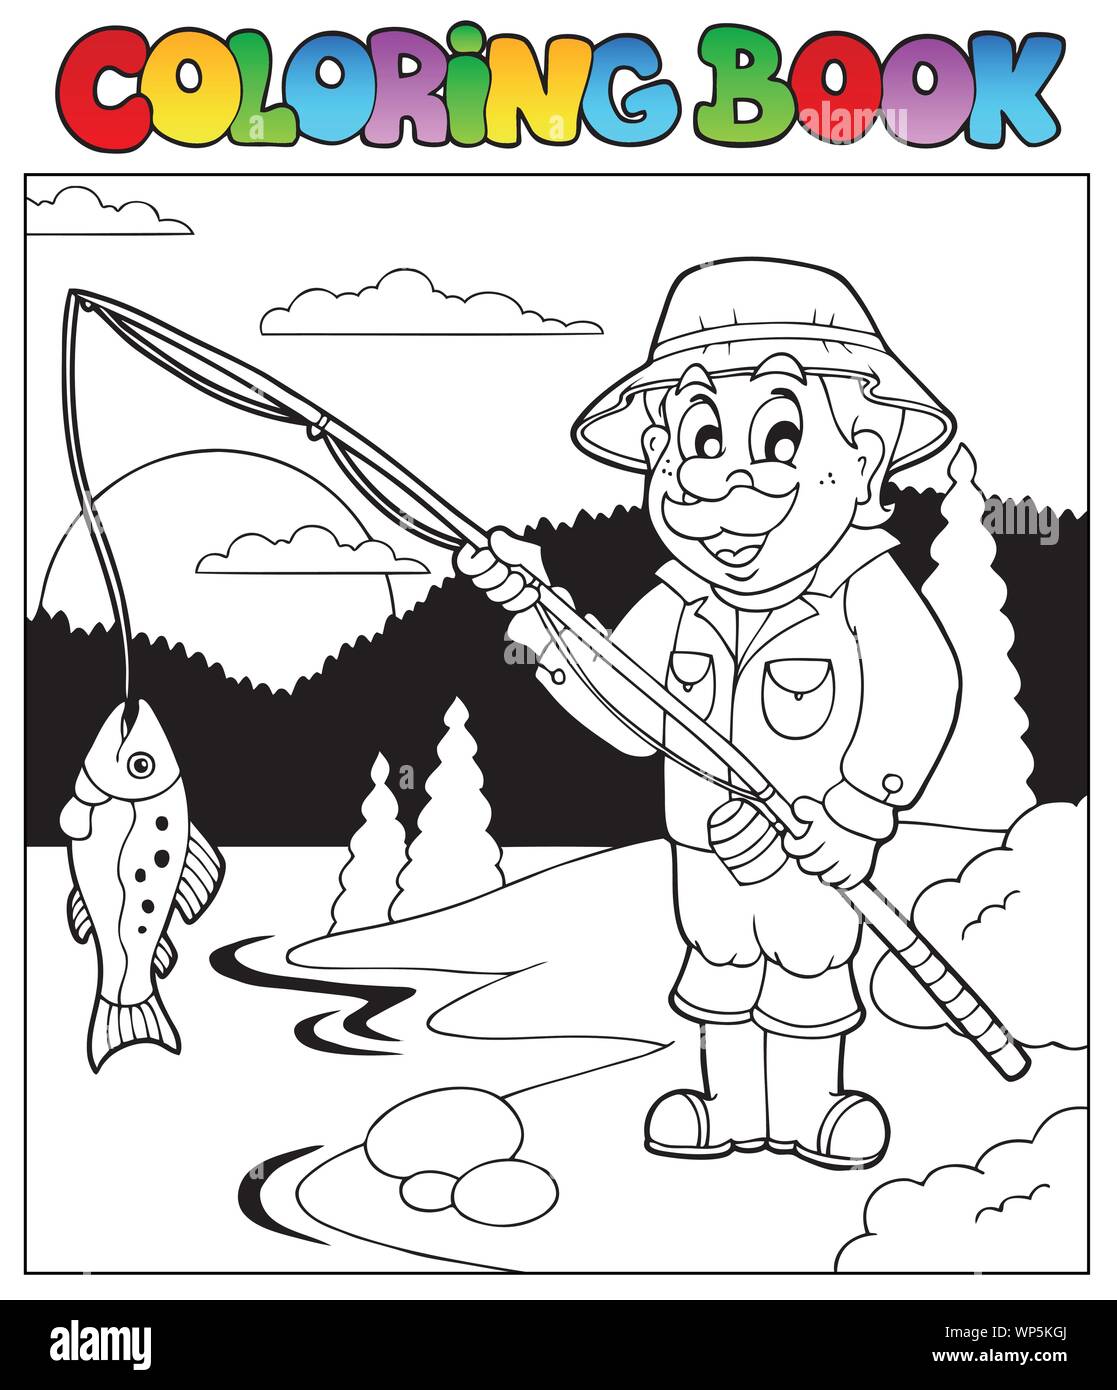 Coloring book with fisherman 1 Stock Vector